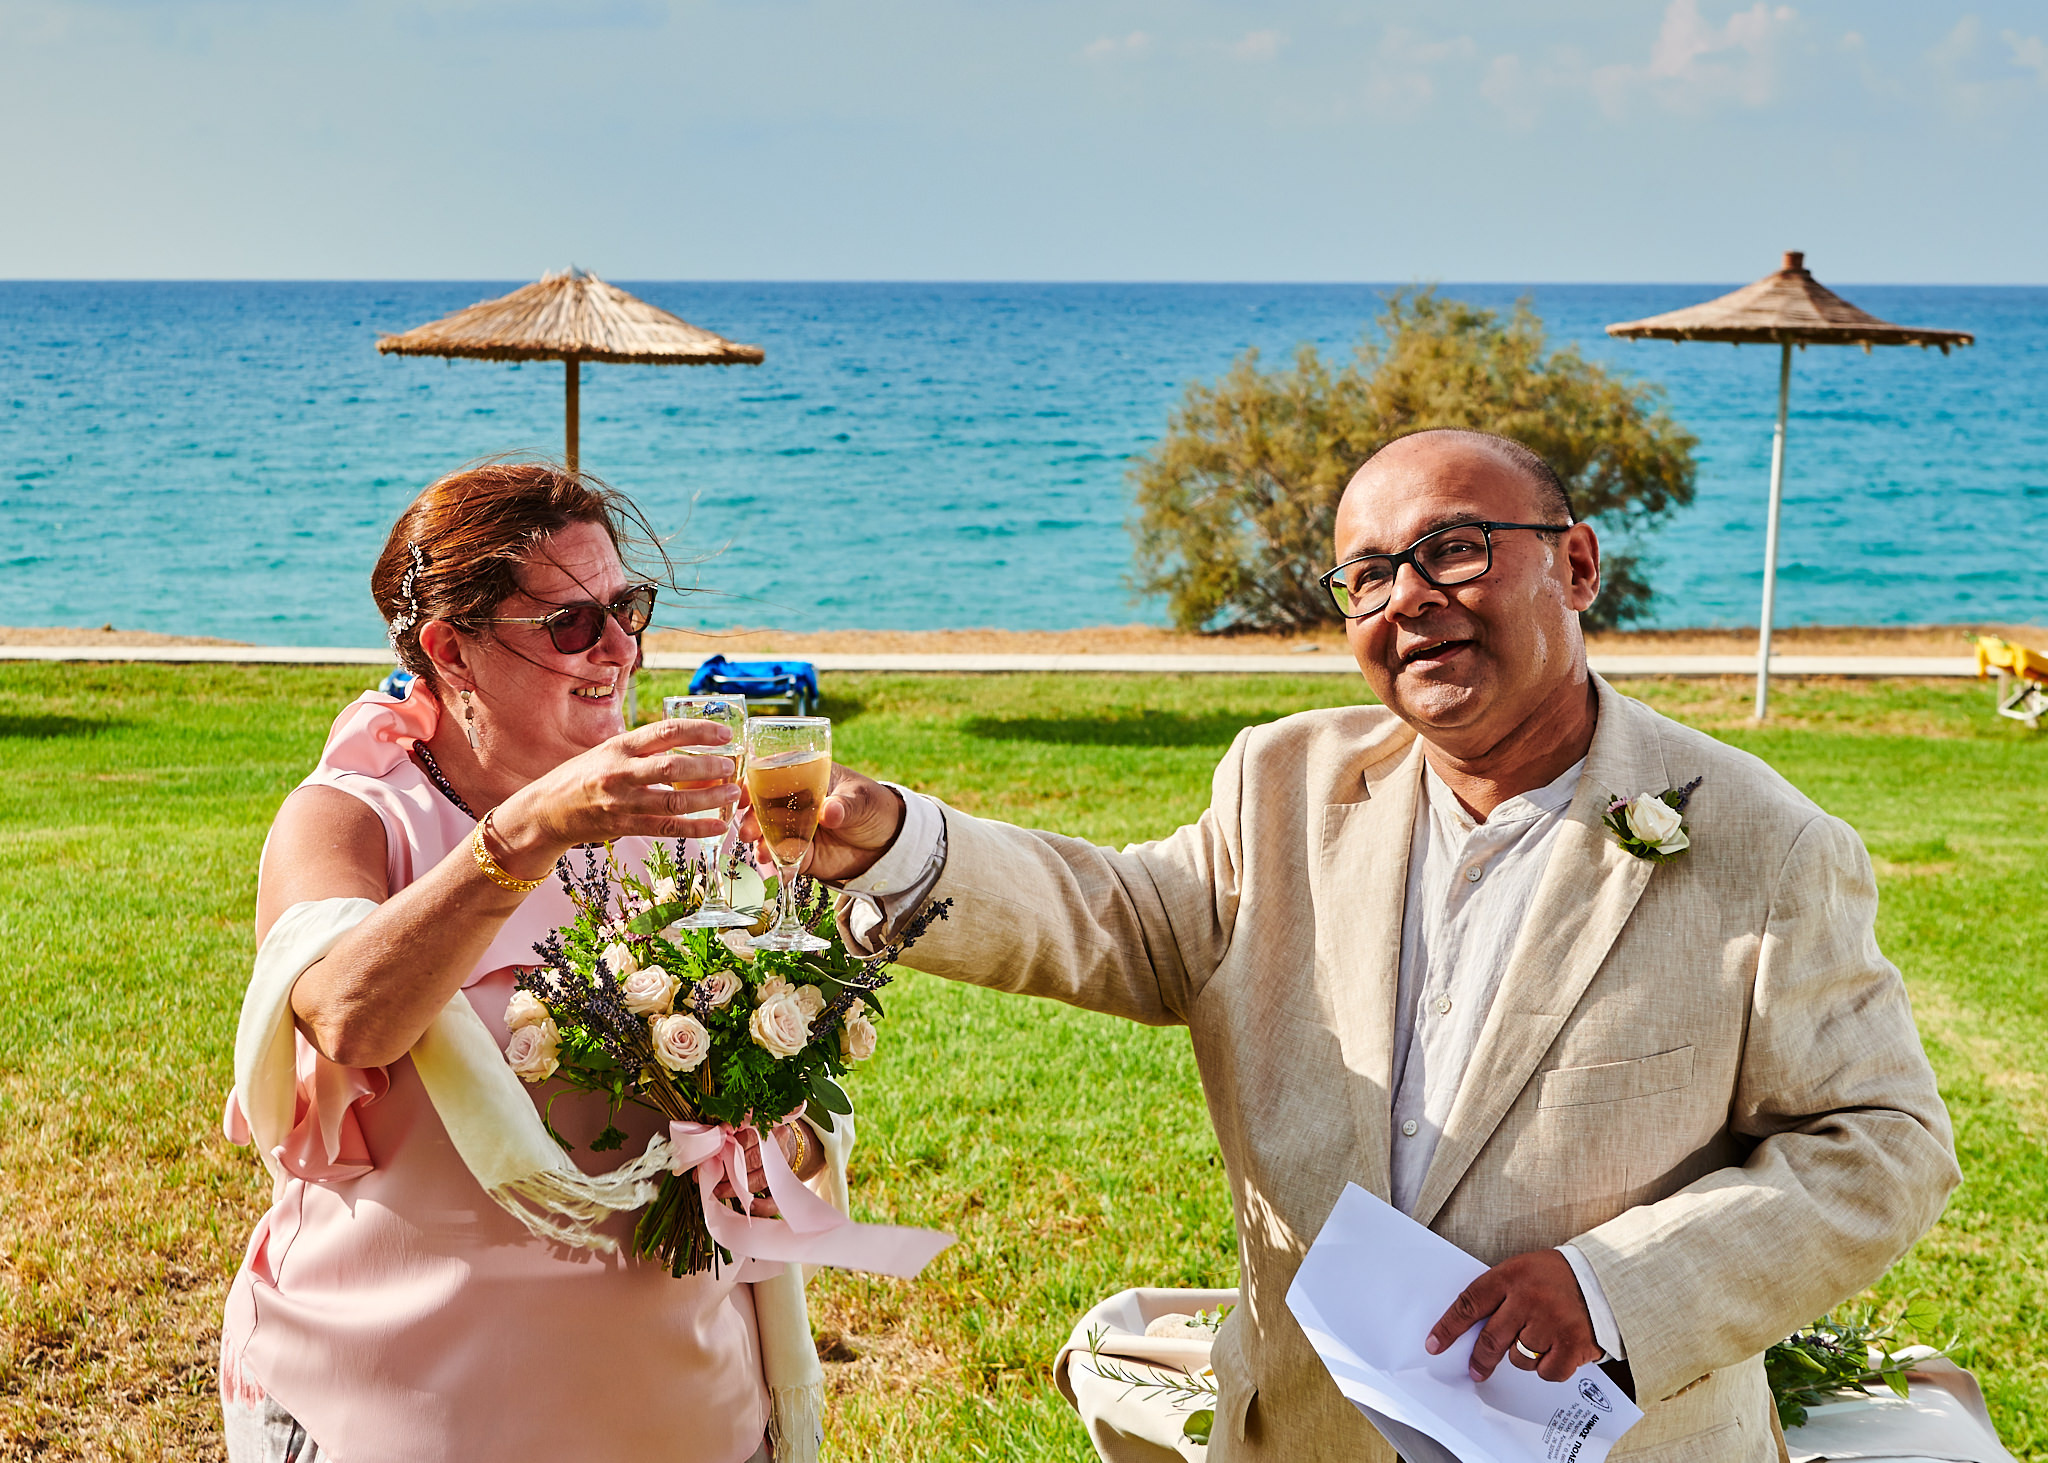 The Wedding of Carolyn and Avirup, which was held at Natura Beach Hotel, Polis in Cyprus.